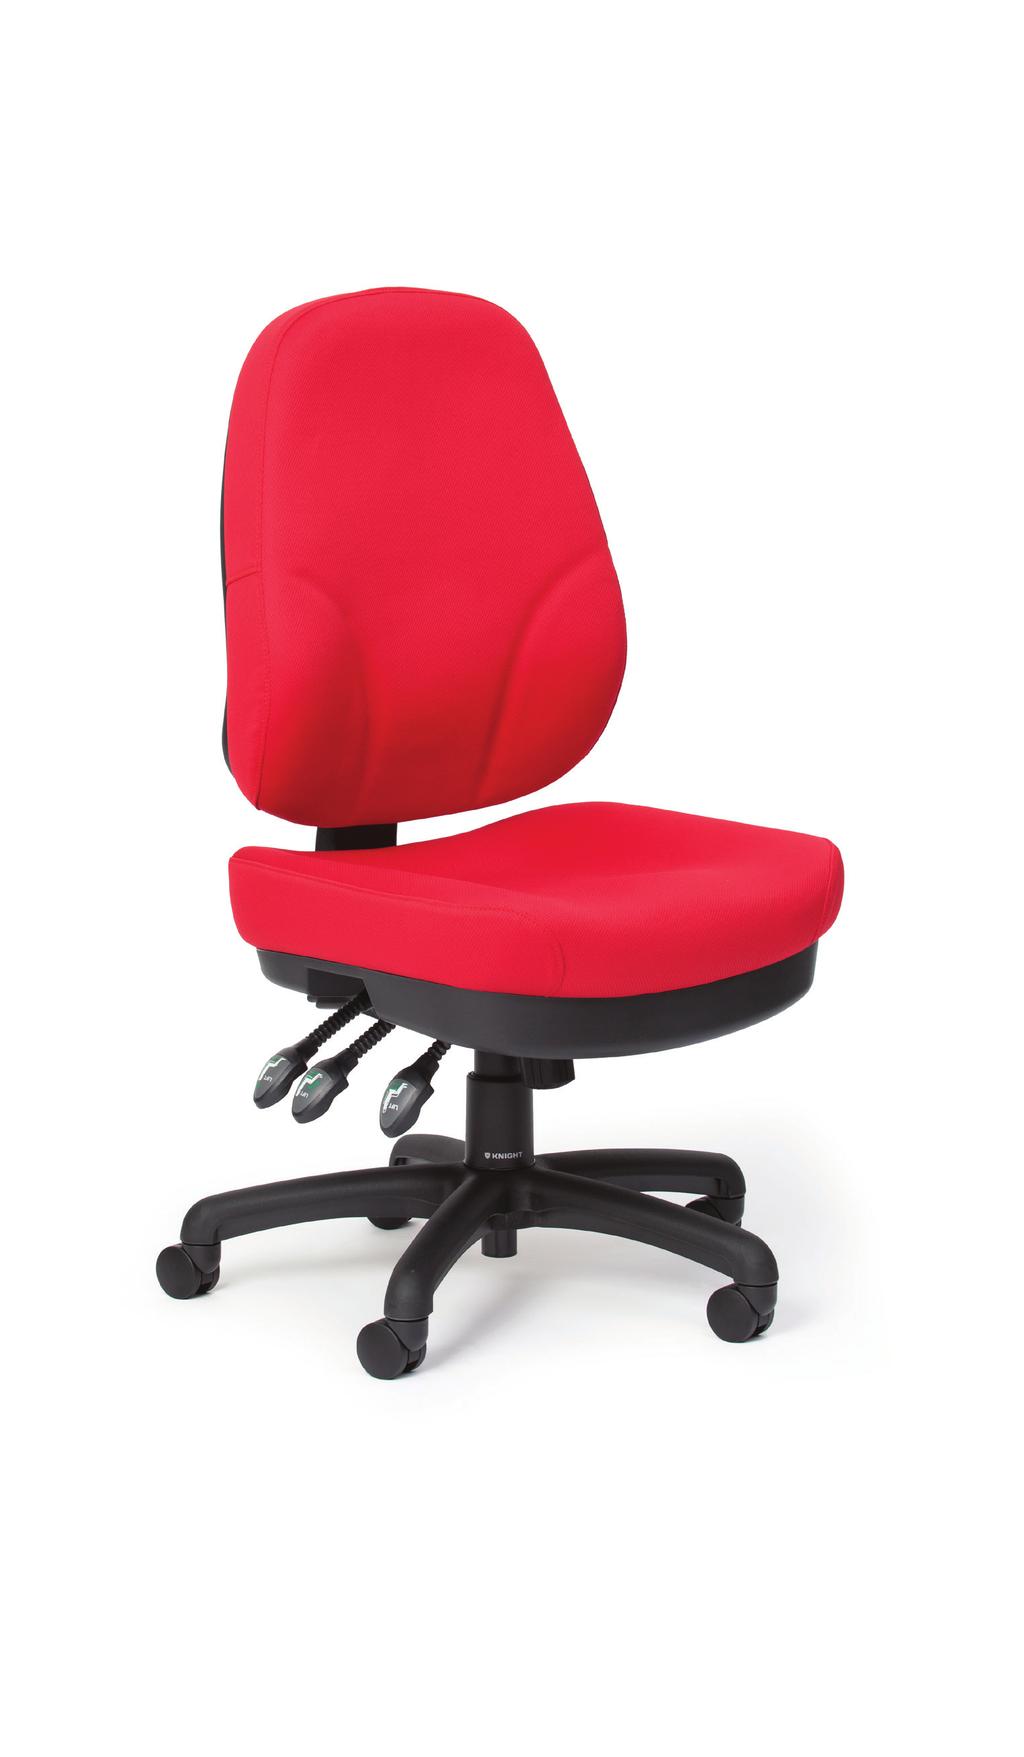 Plymouth A BIG CHAIR for larger bodies. Plush high back with specially molded high density foam for INTENSE COMFORT. You ve only got one back and we help you to look after it!